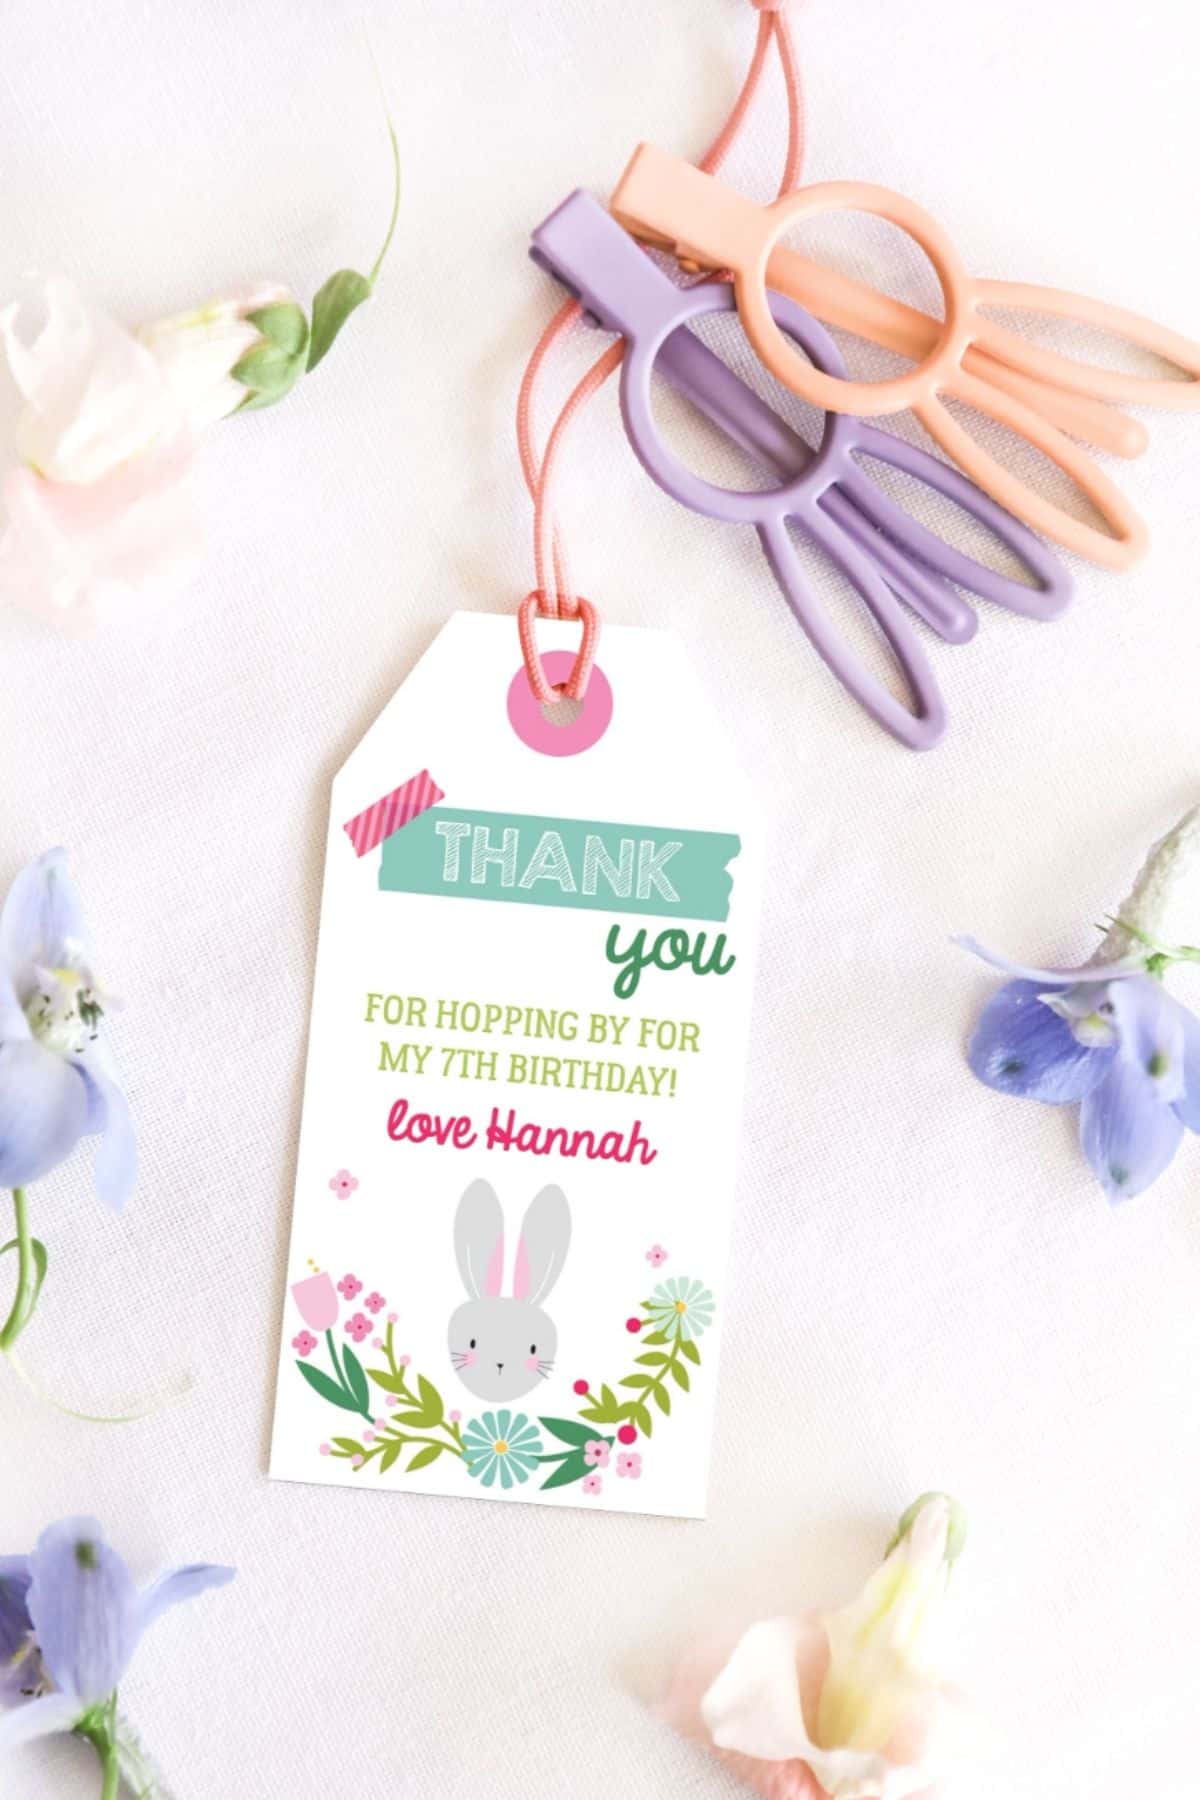 A spring themed favor tag with a bunny face on it.